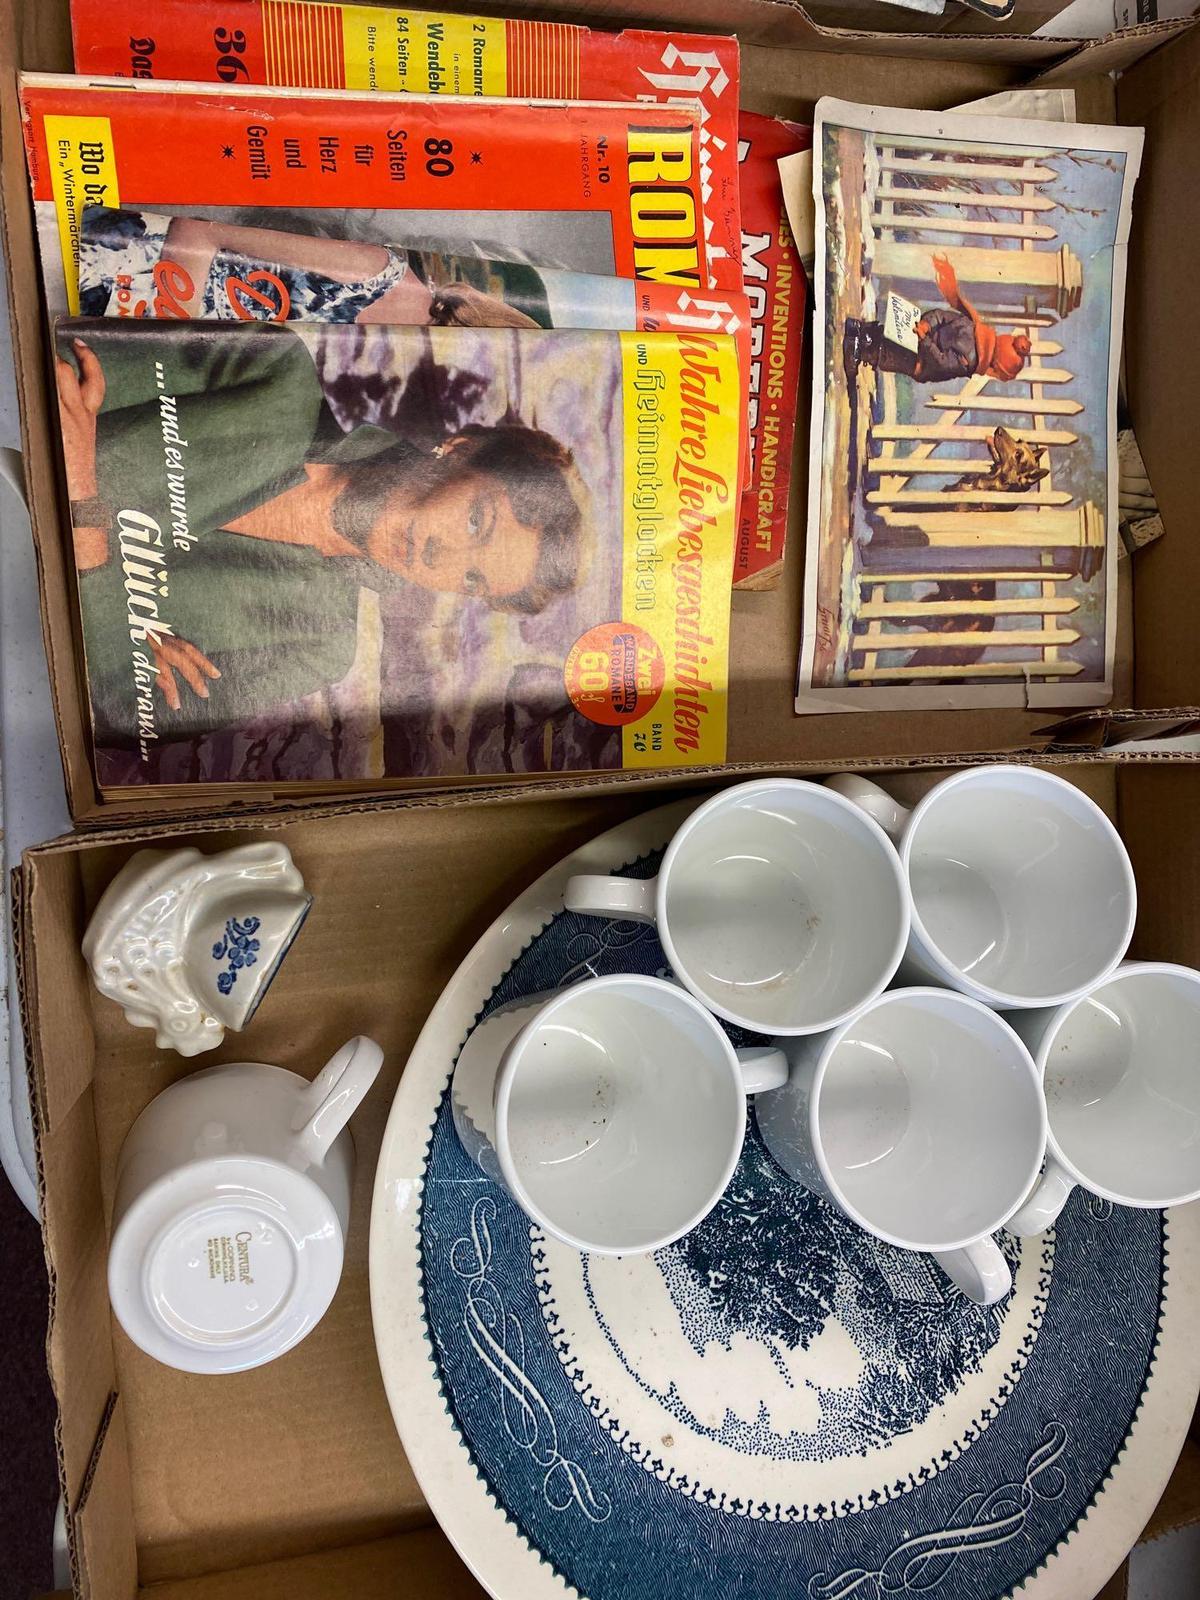 2 flats, 1 with old magazines, mugs, 1 large platter